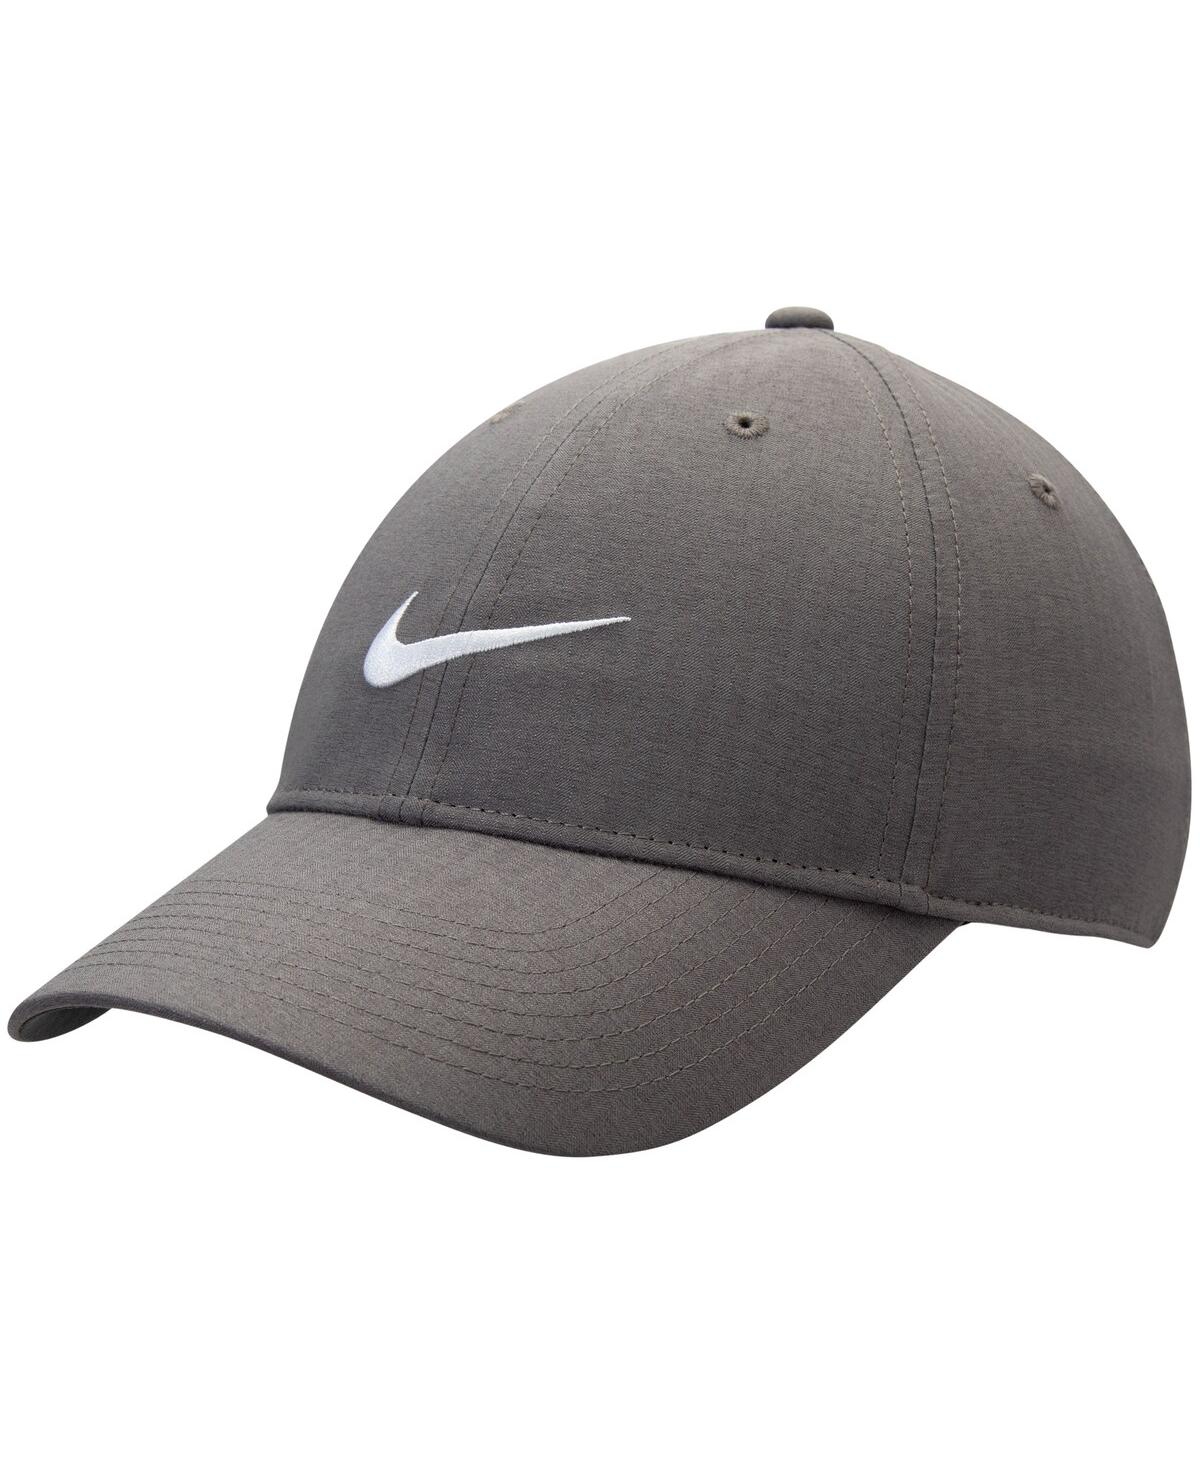 UPC 193154740929 product image for Men's Anthracite Legacy91 Tech Performance Adjustable Hat | upcitemdb.com